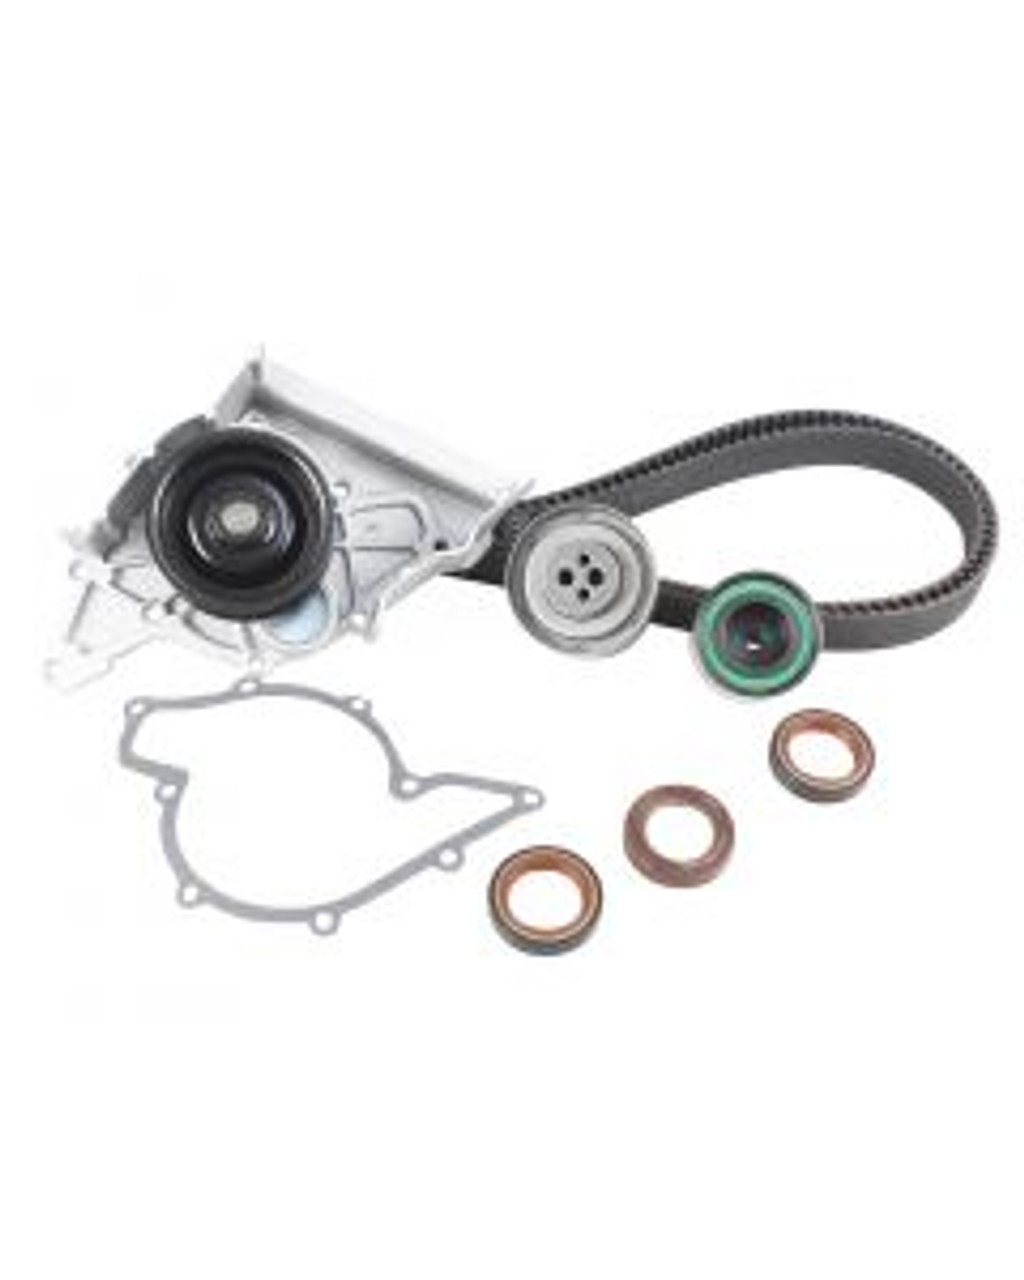 Timing Belt Kit with Water Pump 2.8L 1995 Audi A6 Quattro - TBK806WP.11